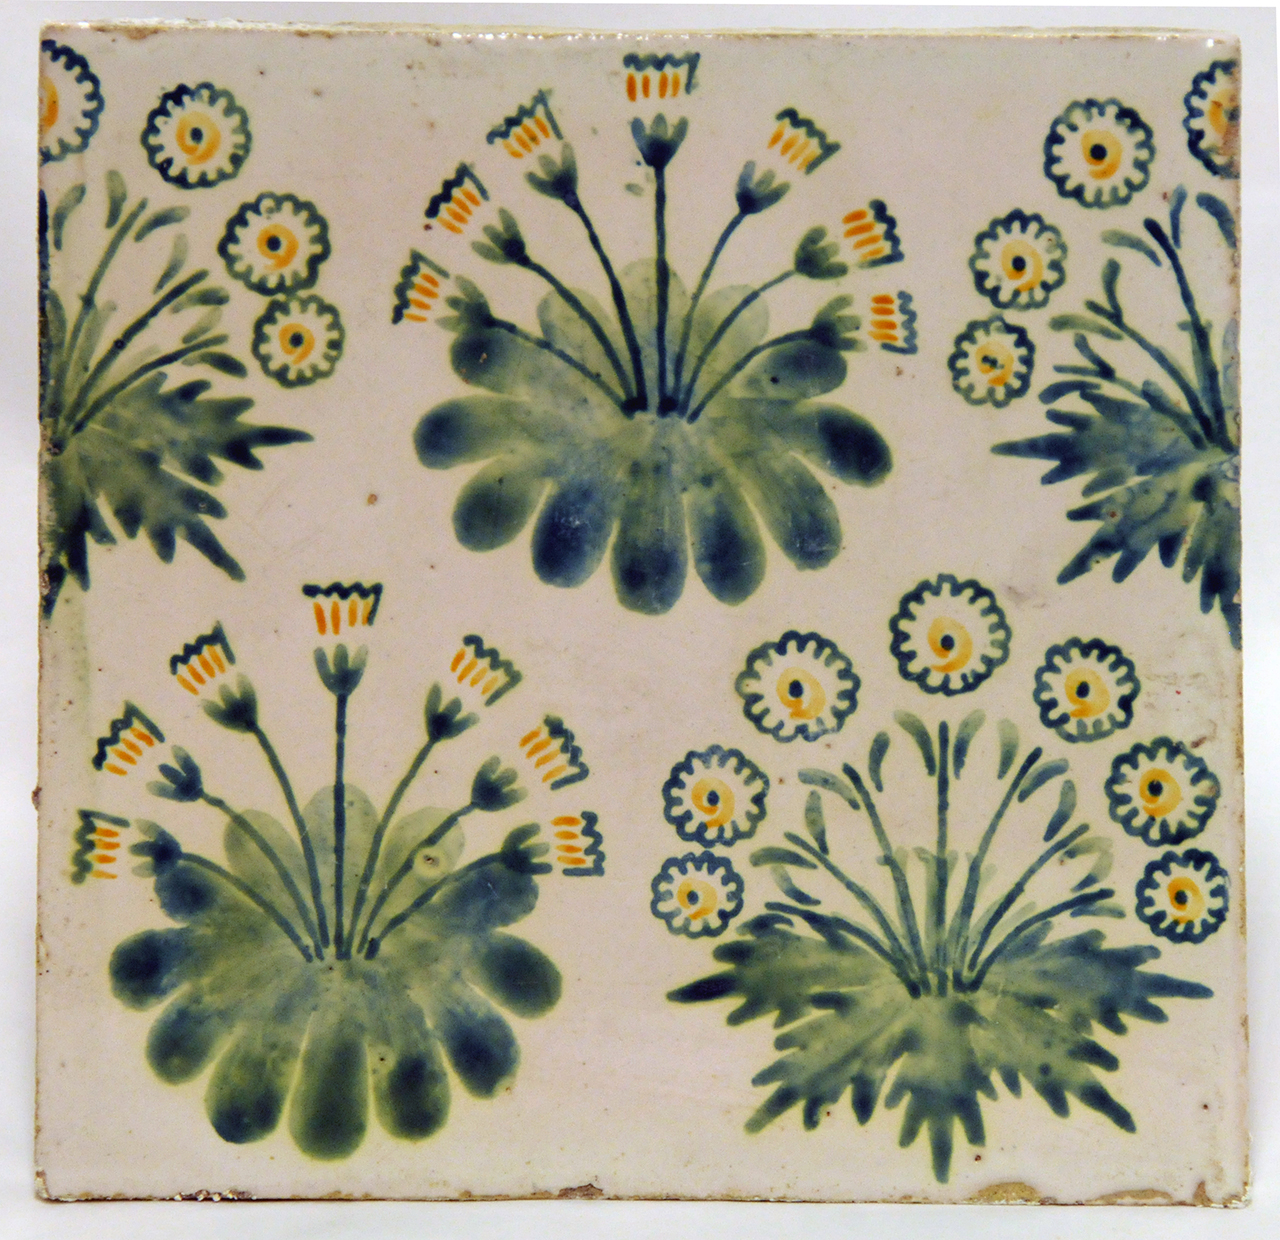 A circular repeating flower pattern with two variations. The stems are green and the flowers are yellow and white.